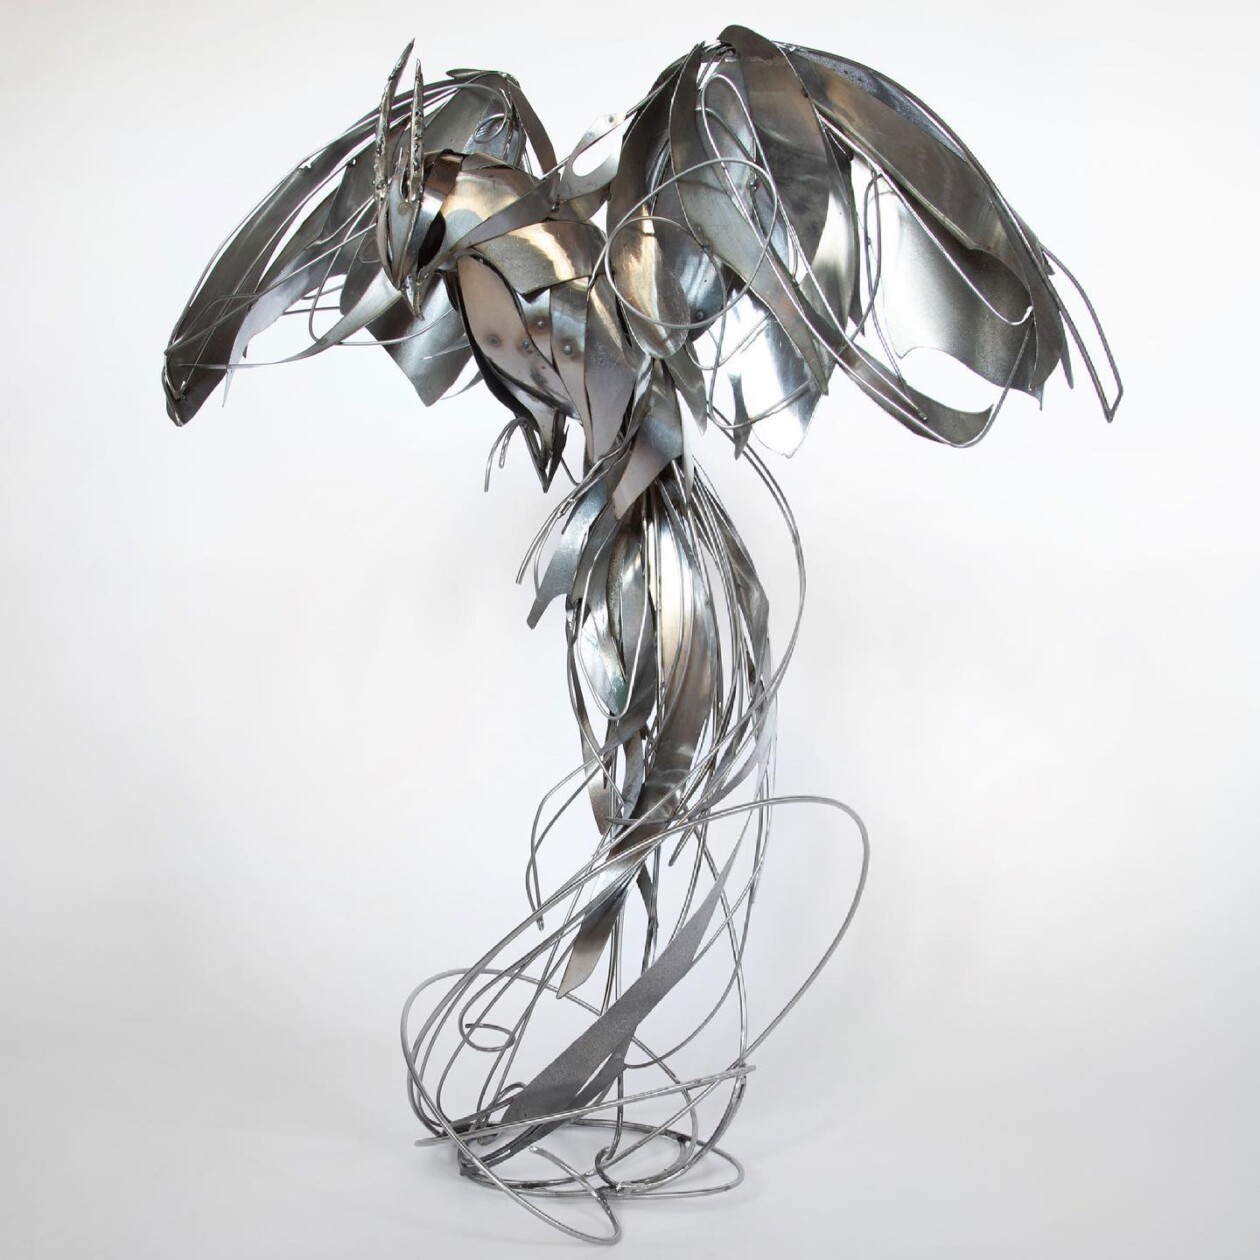 Magnificent Metallic Animal Sculptures Made With Sweeping Lines By Georgie Seccull (13)